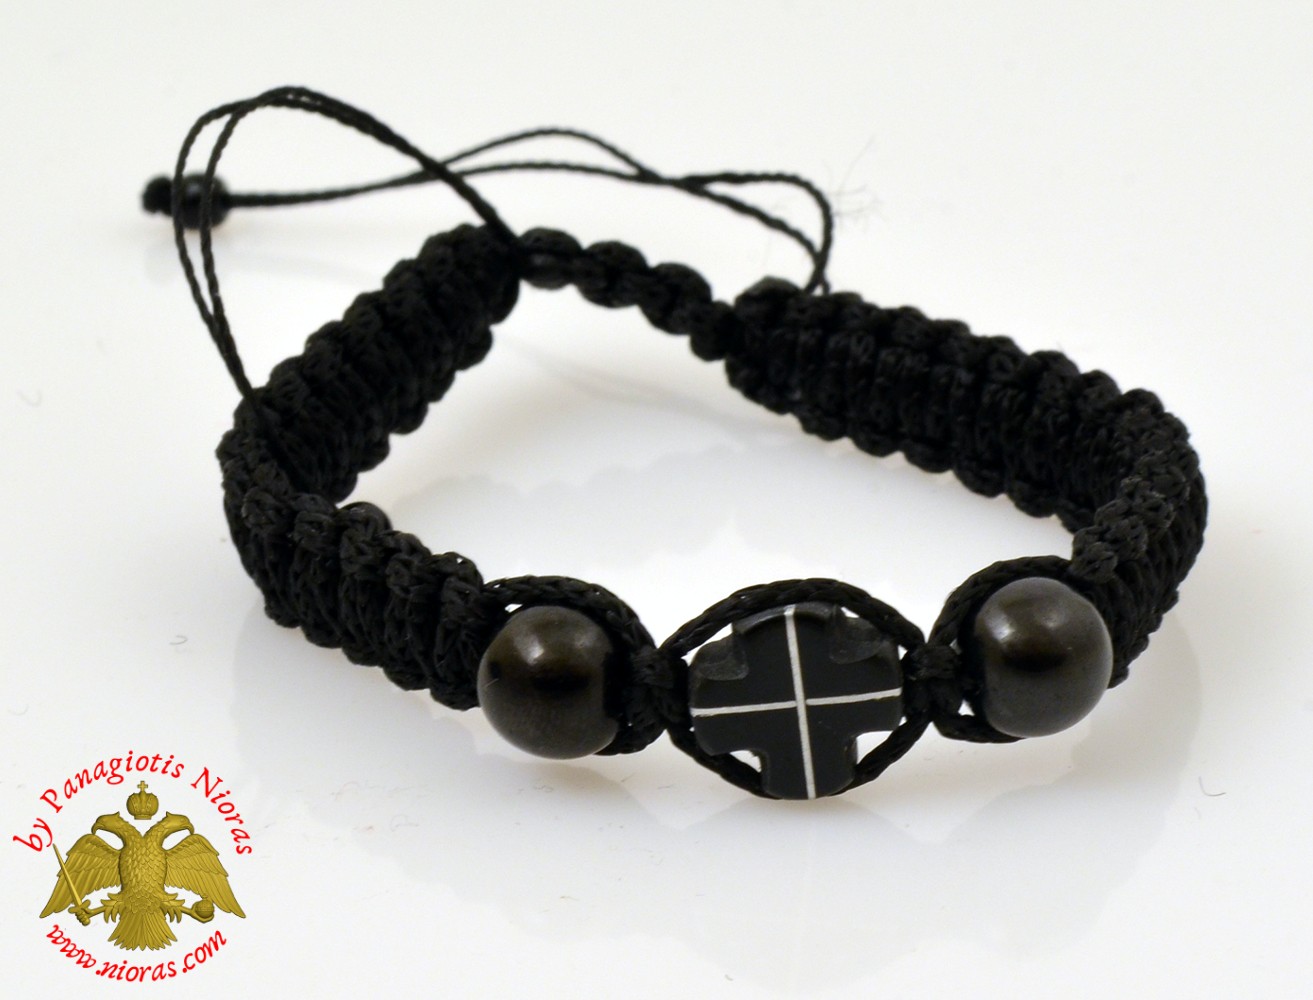 Hand Wrist Praying Rope with Wooden Black Cross